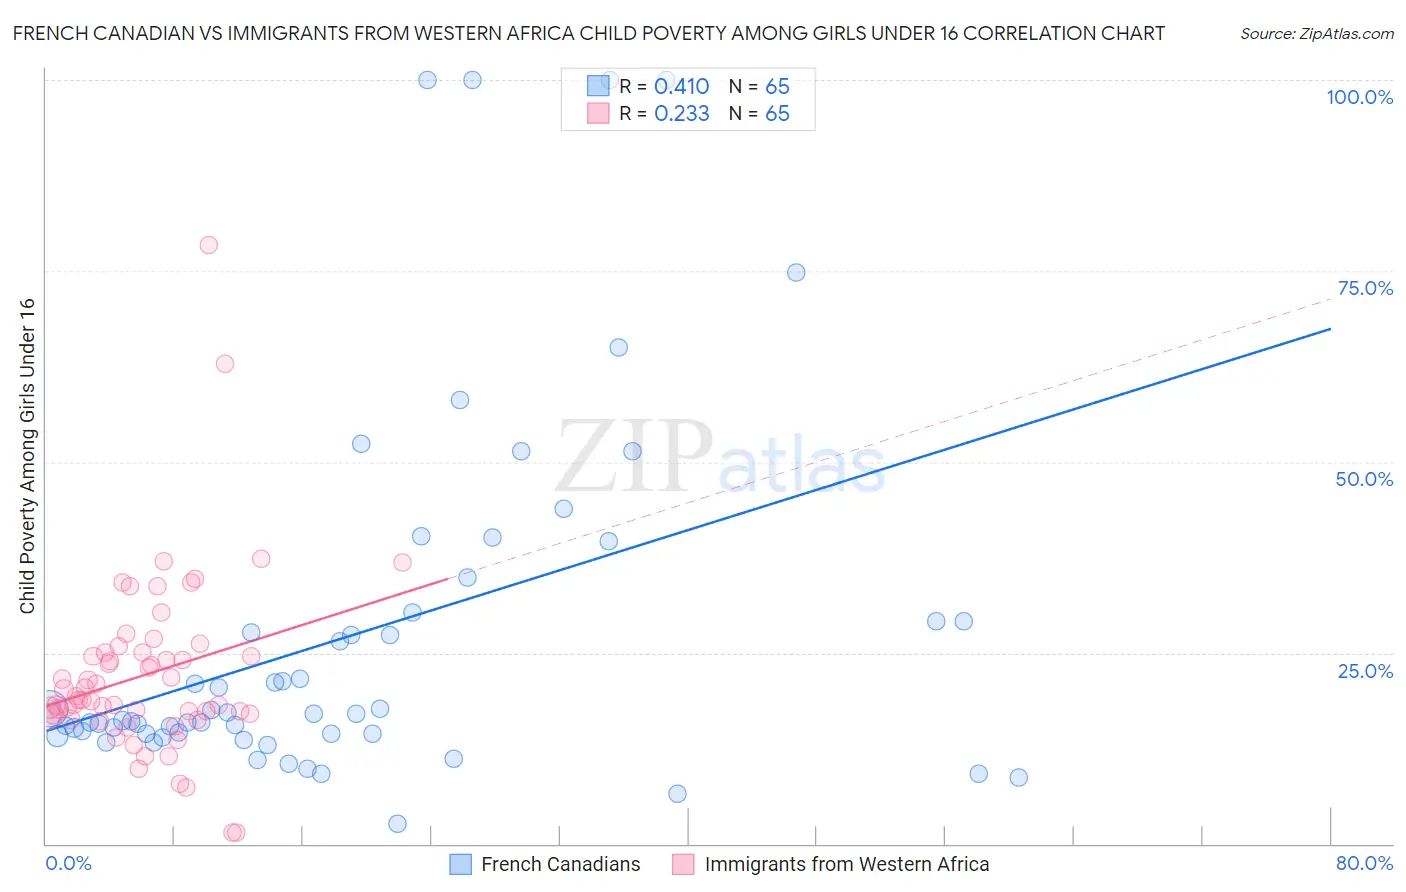 French Canadian vs Immigrants from Western Africa Child Poverty Among Girls Under 16